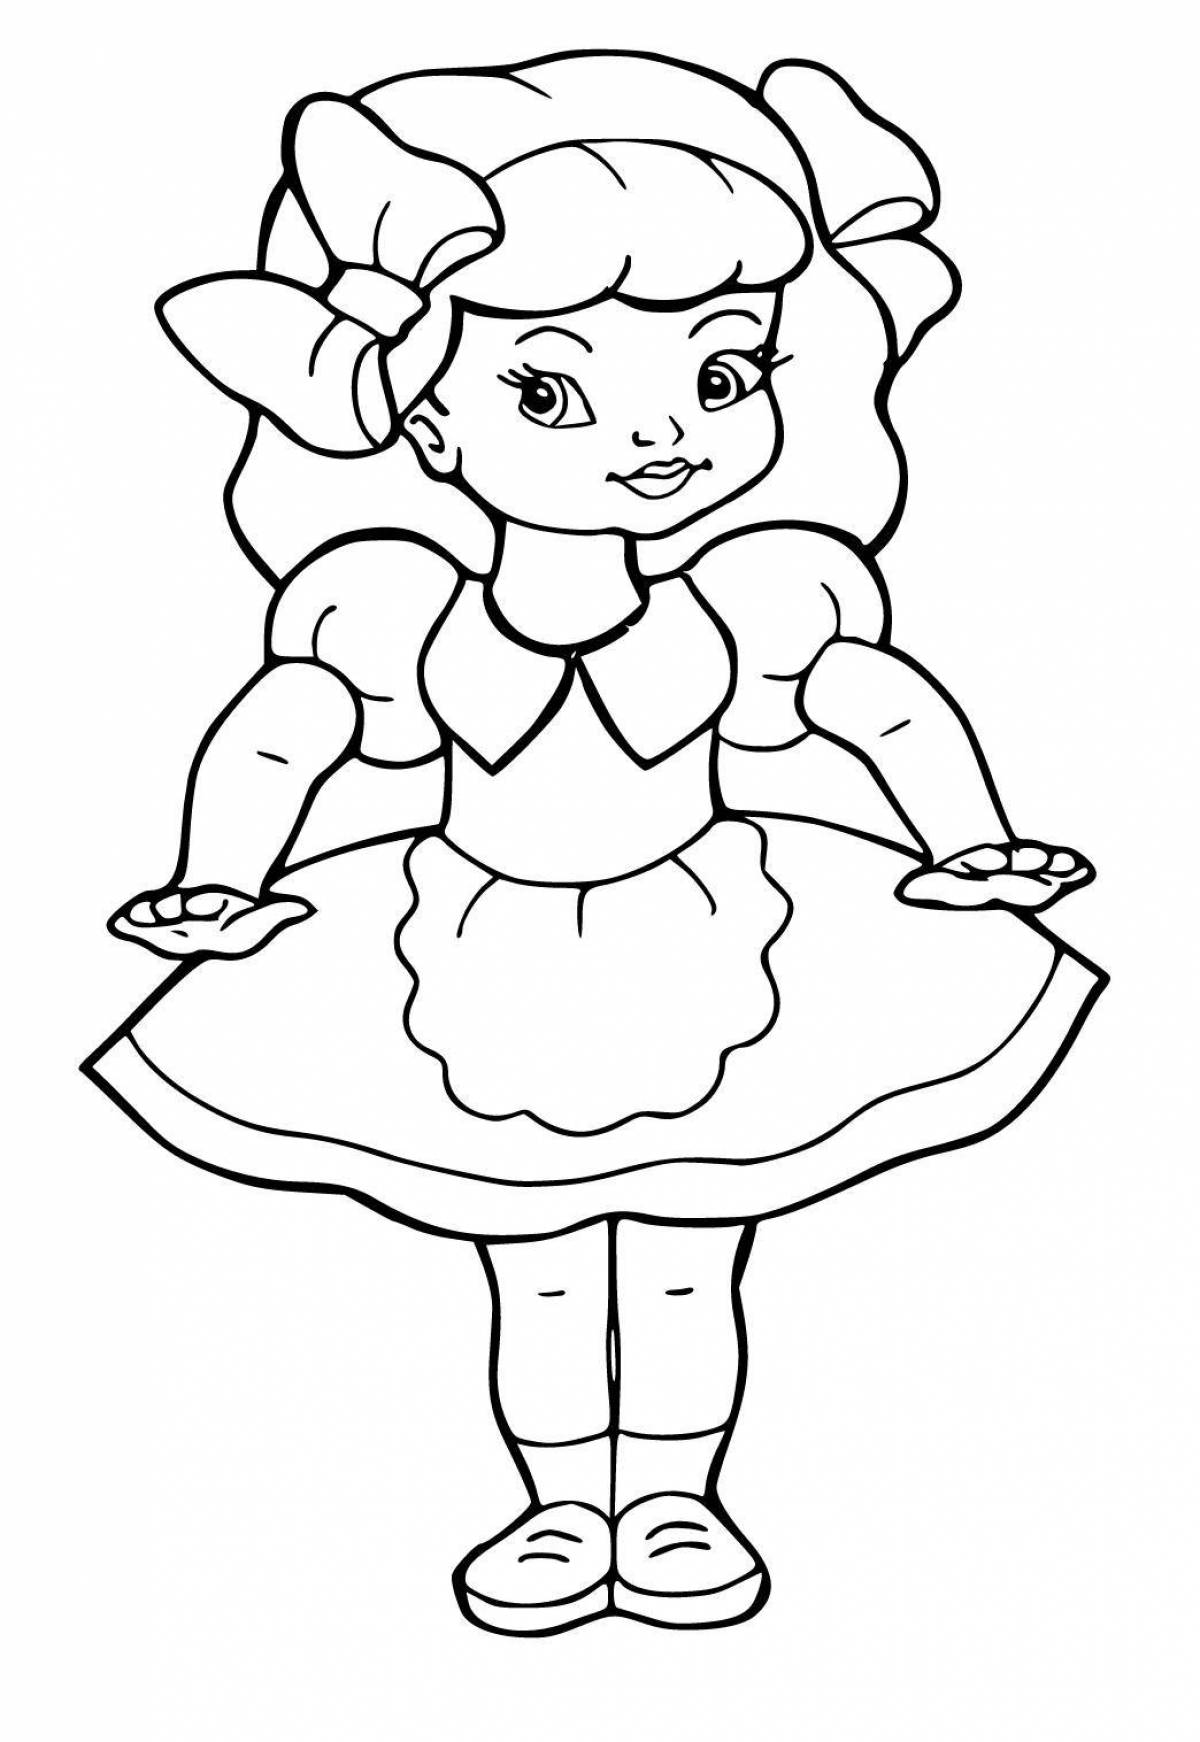 Fancy dolly coloring